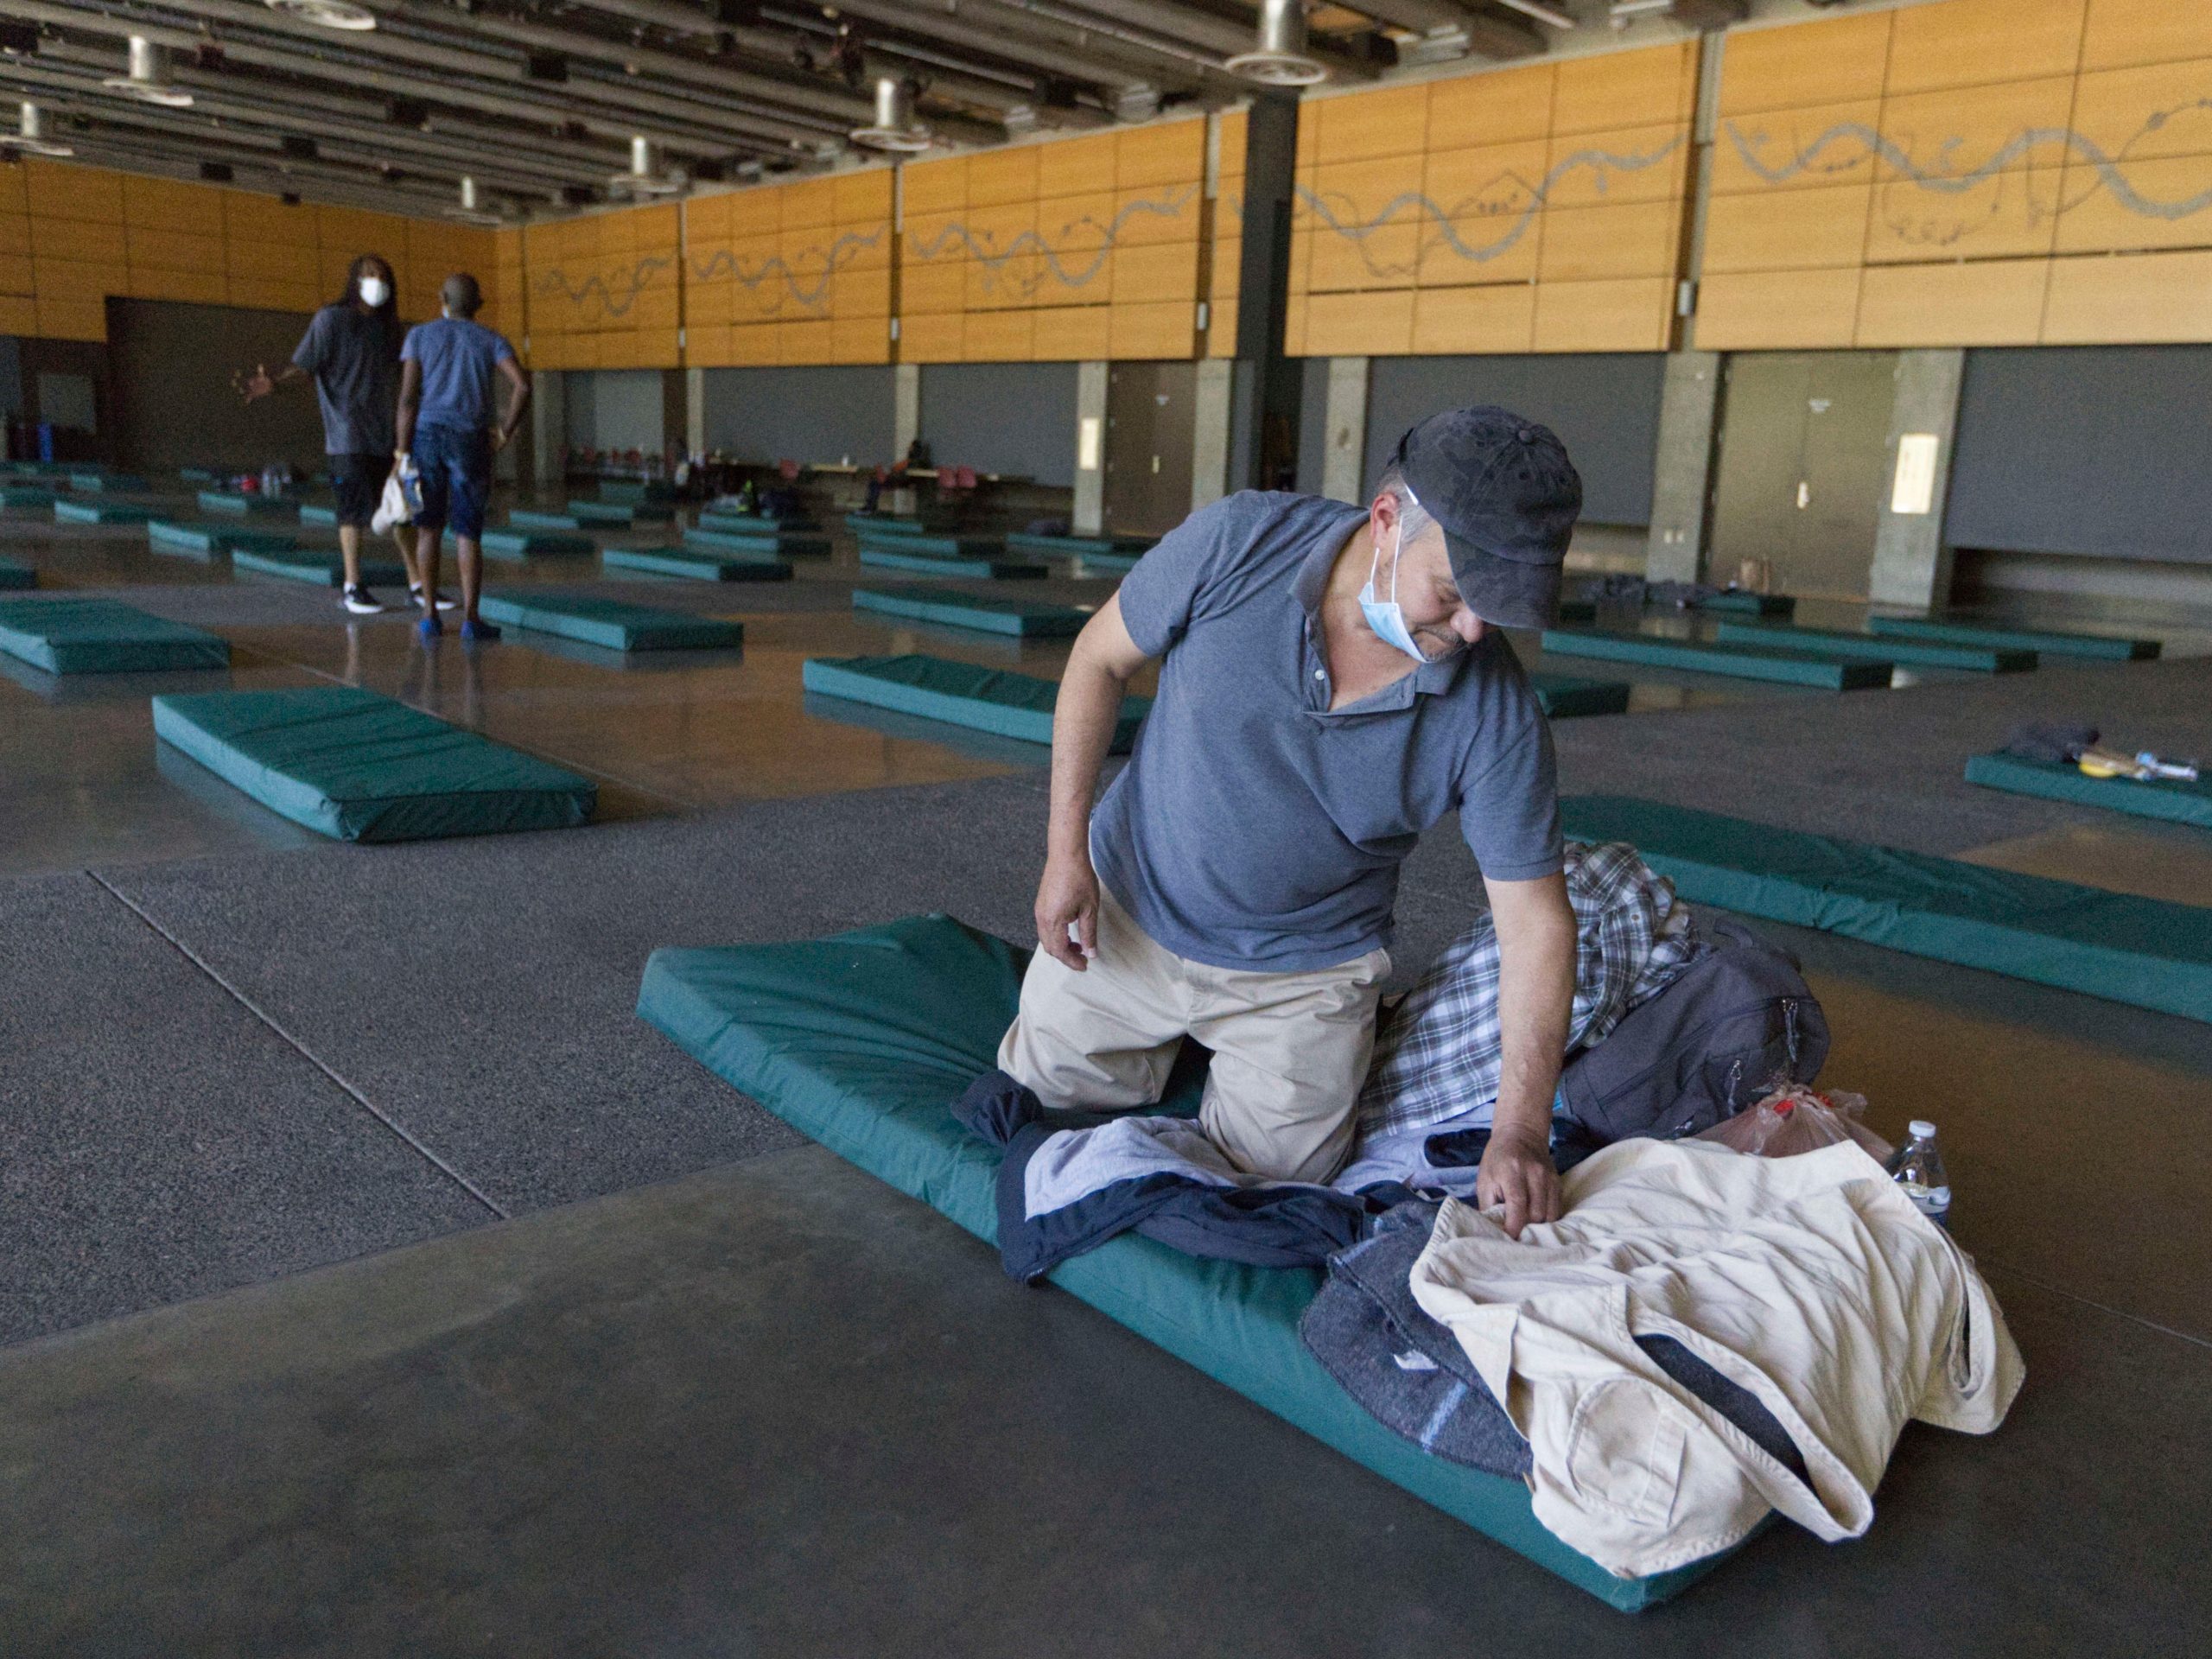 Man sets up bed in cooling shelter in seattle